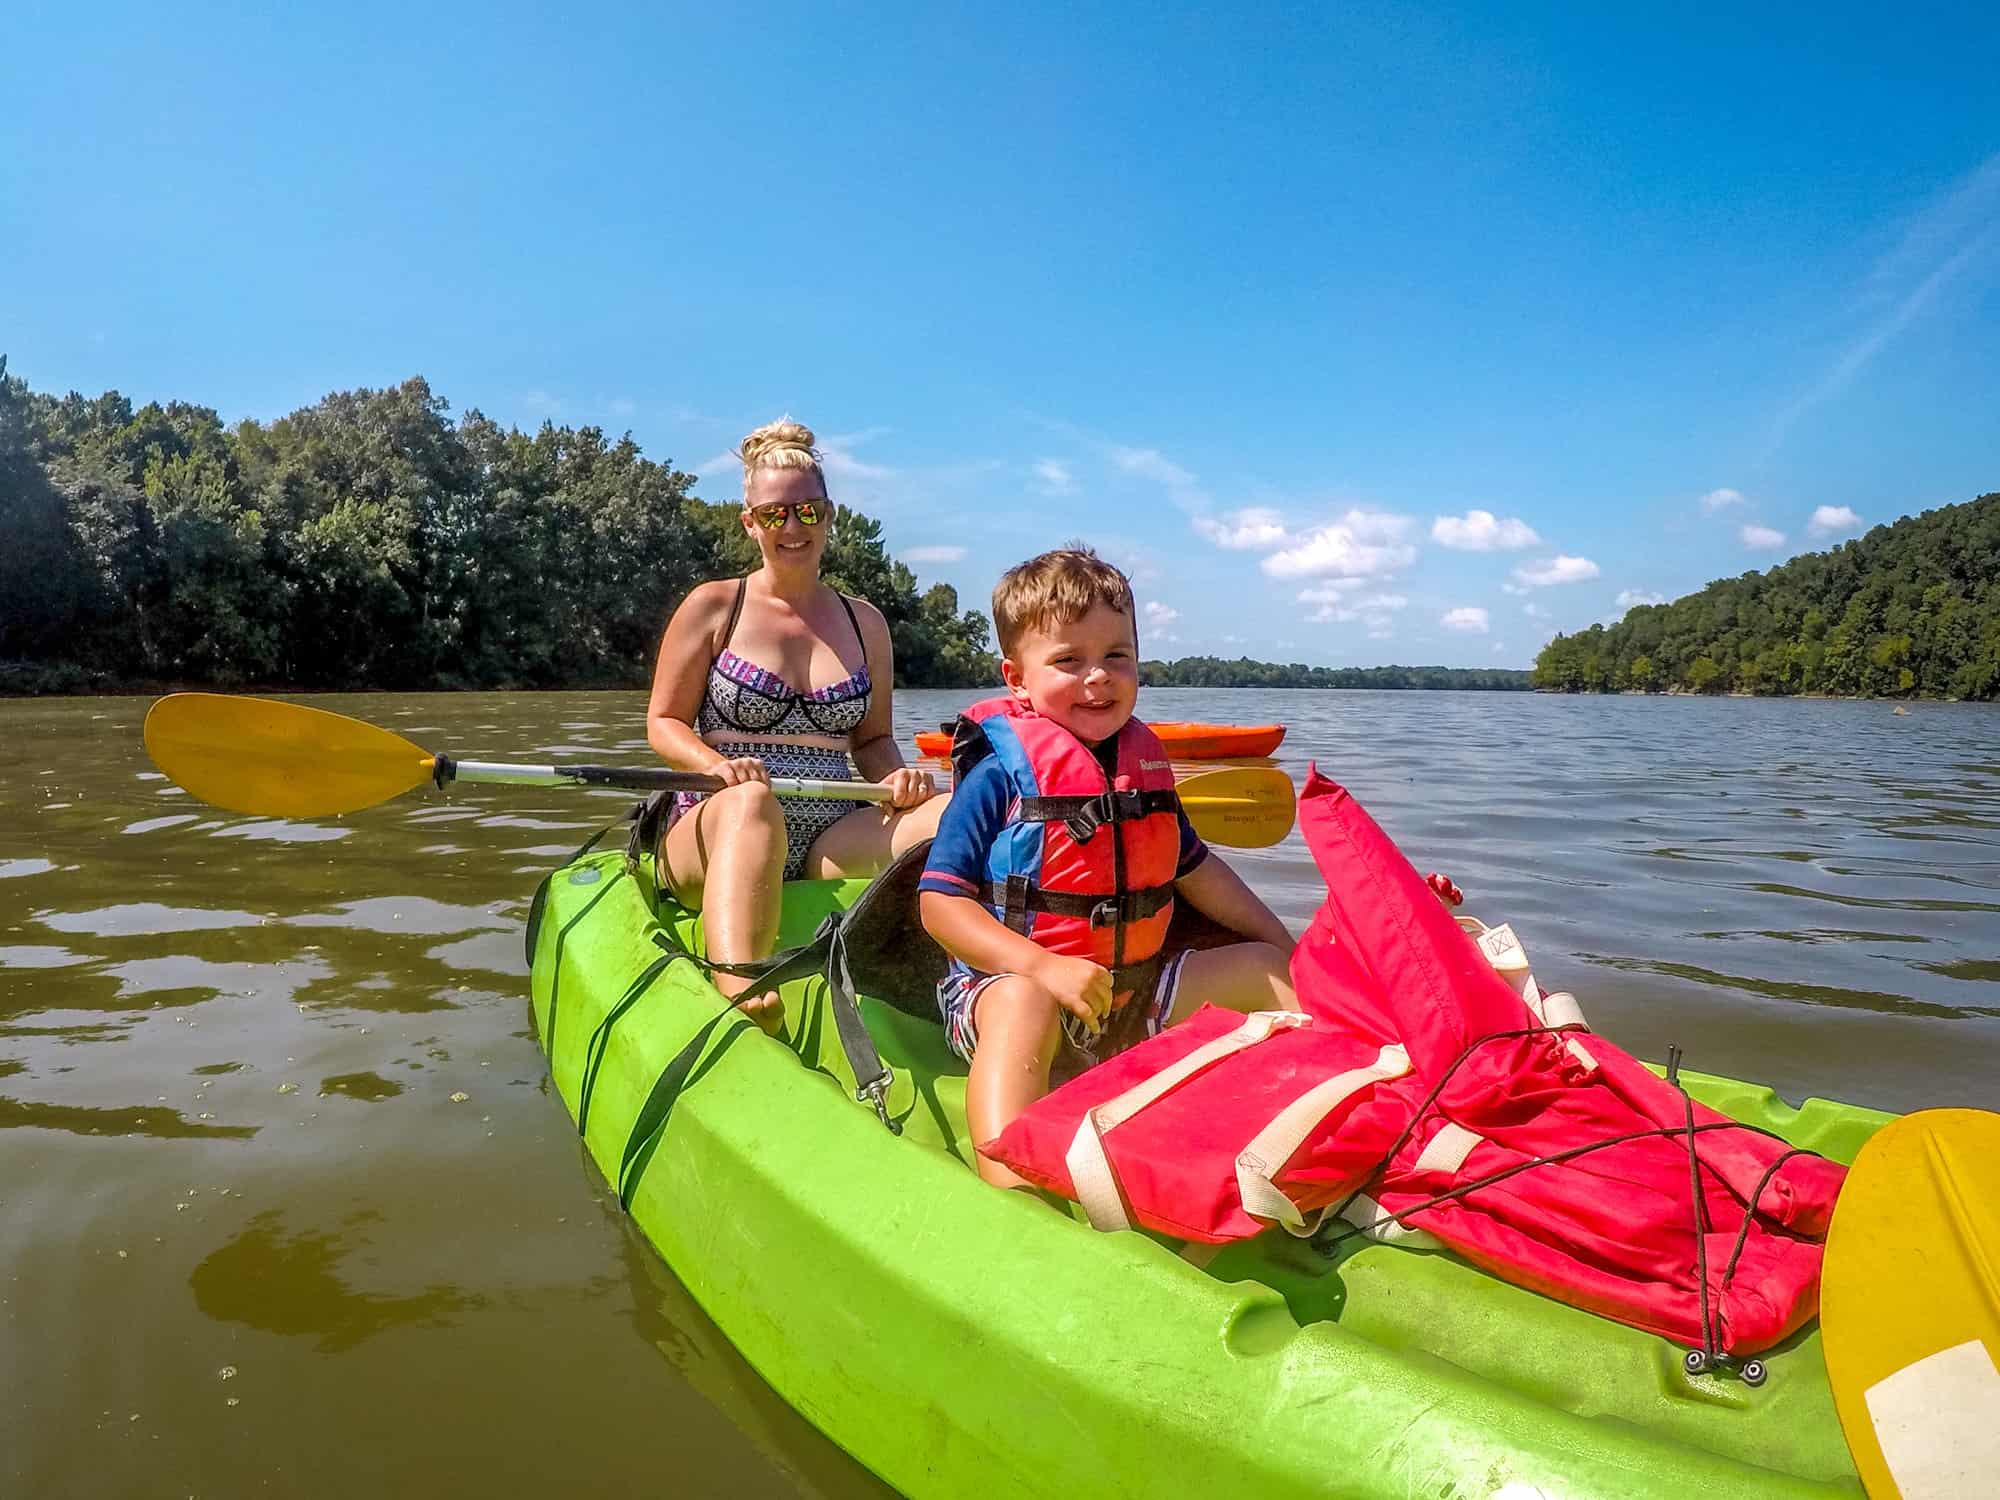 Child in kayak with life jacket on - best life jackets for kids